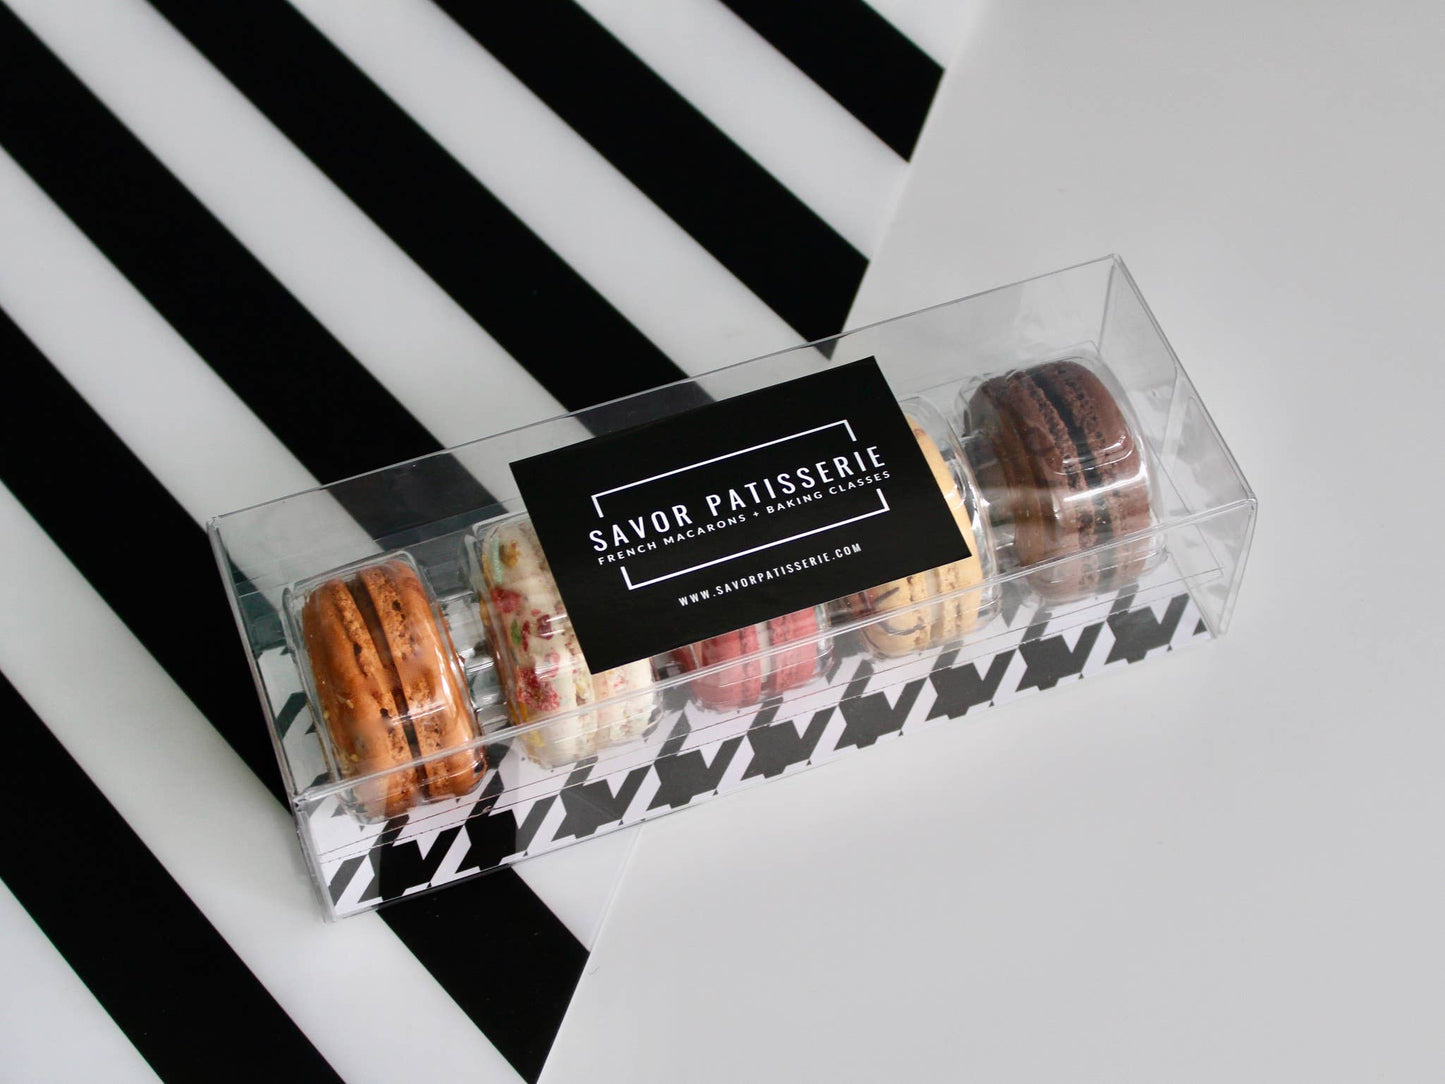 Savor Patisserie French Macarons - The Best Sellers Box - Gift Box of 5 French Macarons